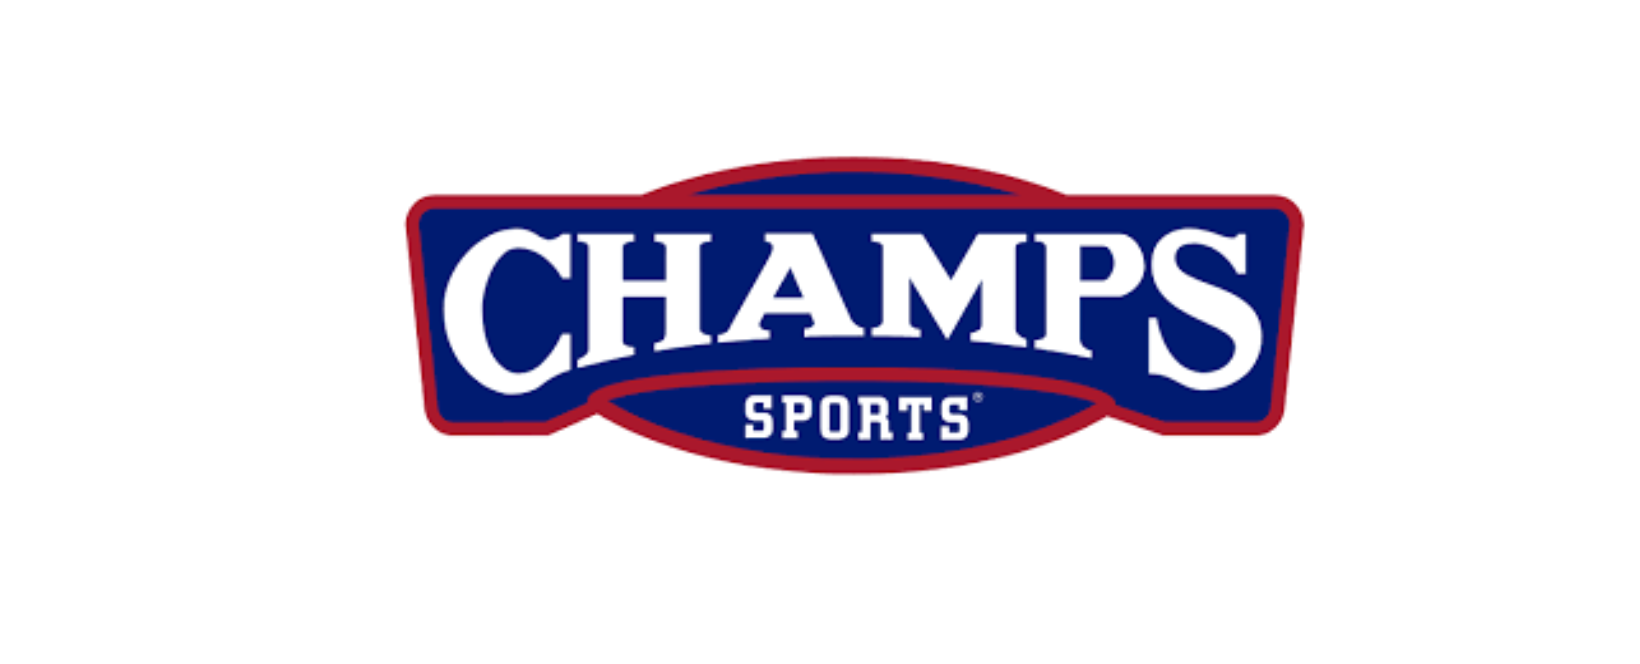 Champs Sports Discount Code 2022